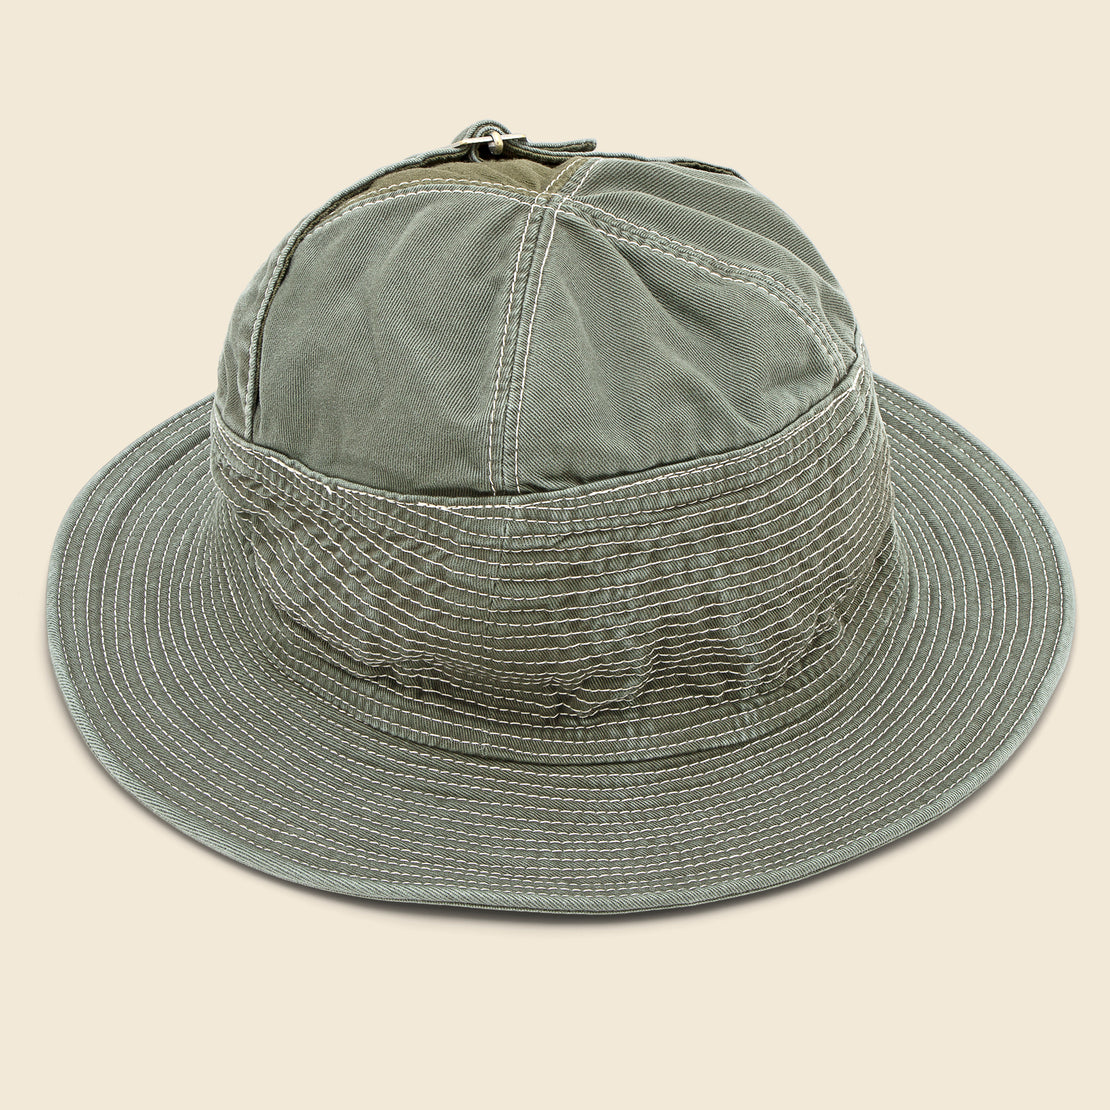 The Old Man and the Sea Chino Bucket Hat - Khaki - Kapital - STAG Provisions - Accessories - Hats